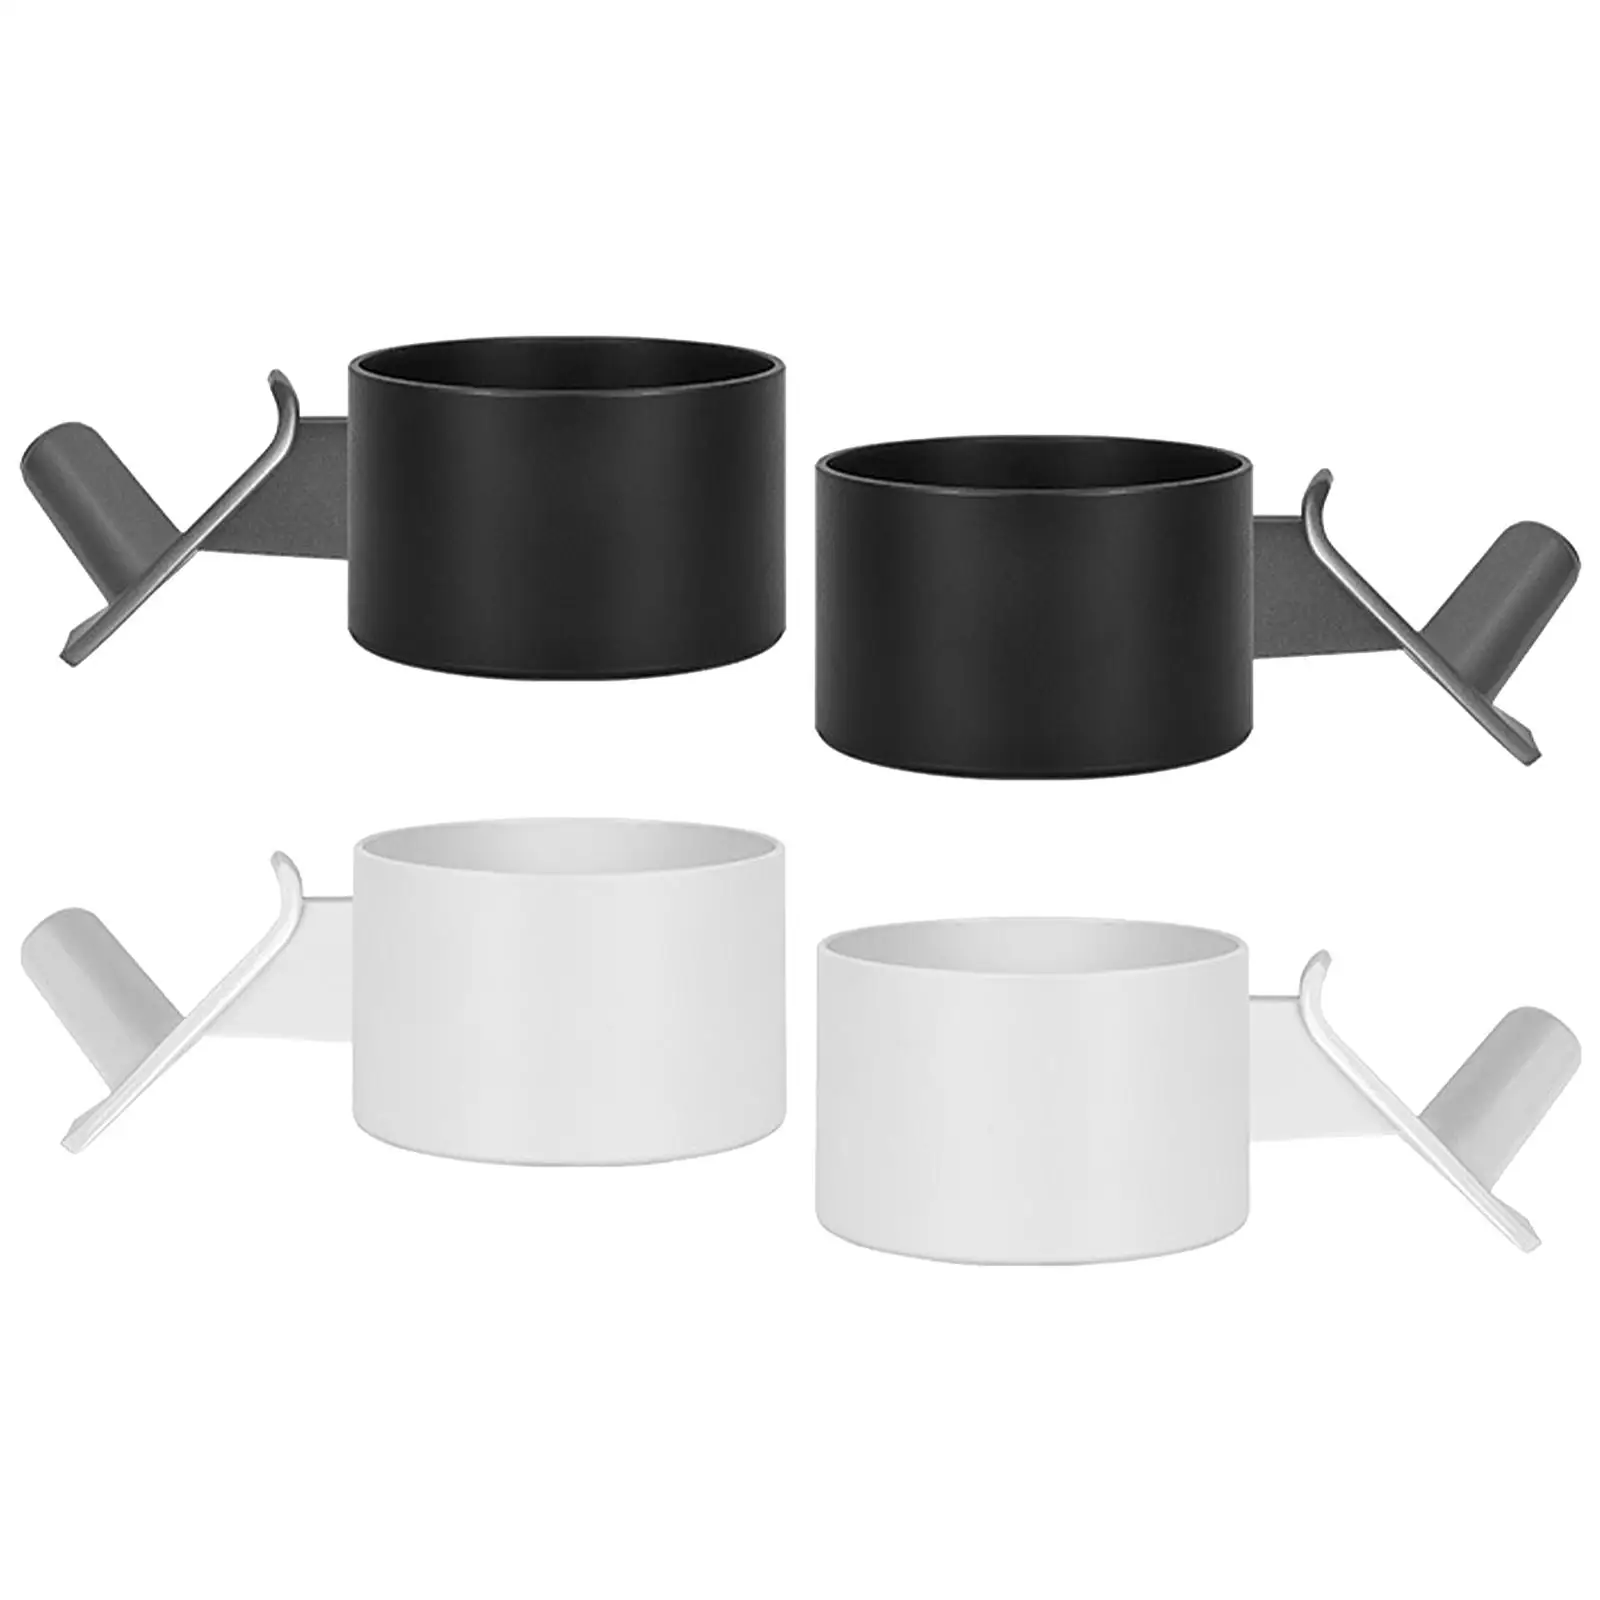 2 in 1 Car Water Cup Holder Multi-Function Interior Accessories Universal Bracket Adapter Stand Fit for Tesla Model 3/Y